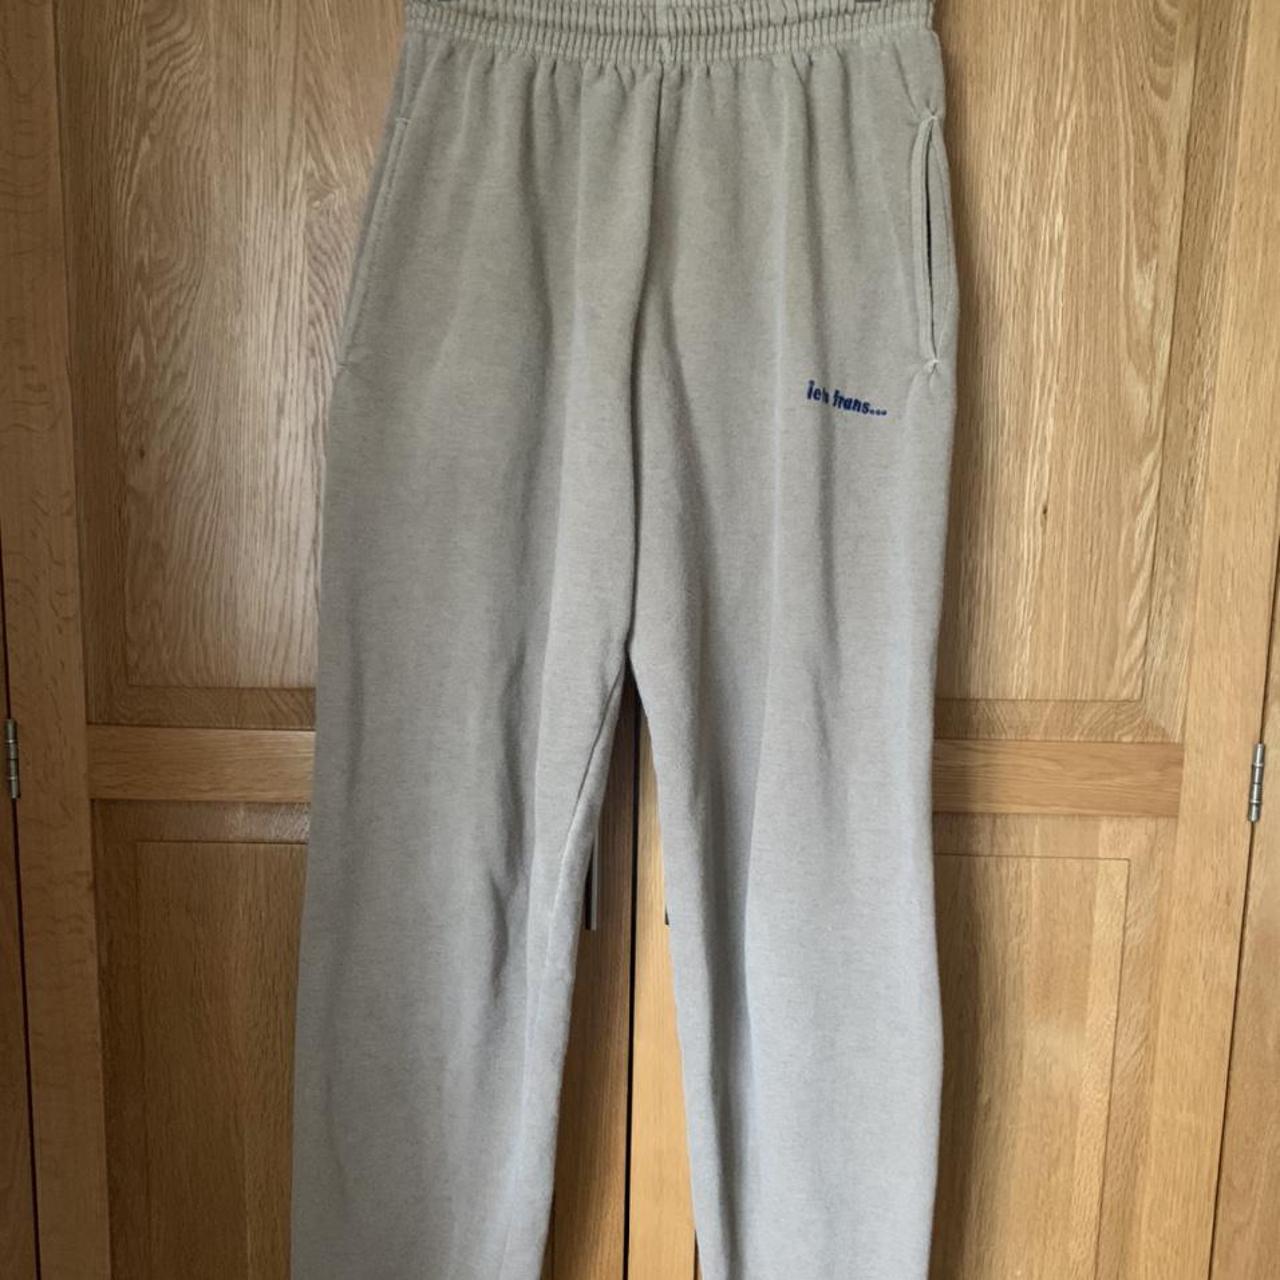 Urban outfitters lets frans Camel colour joggers in... - Depop